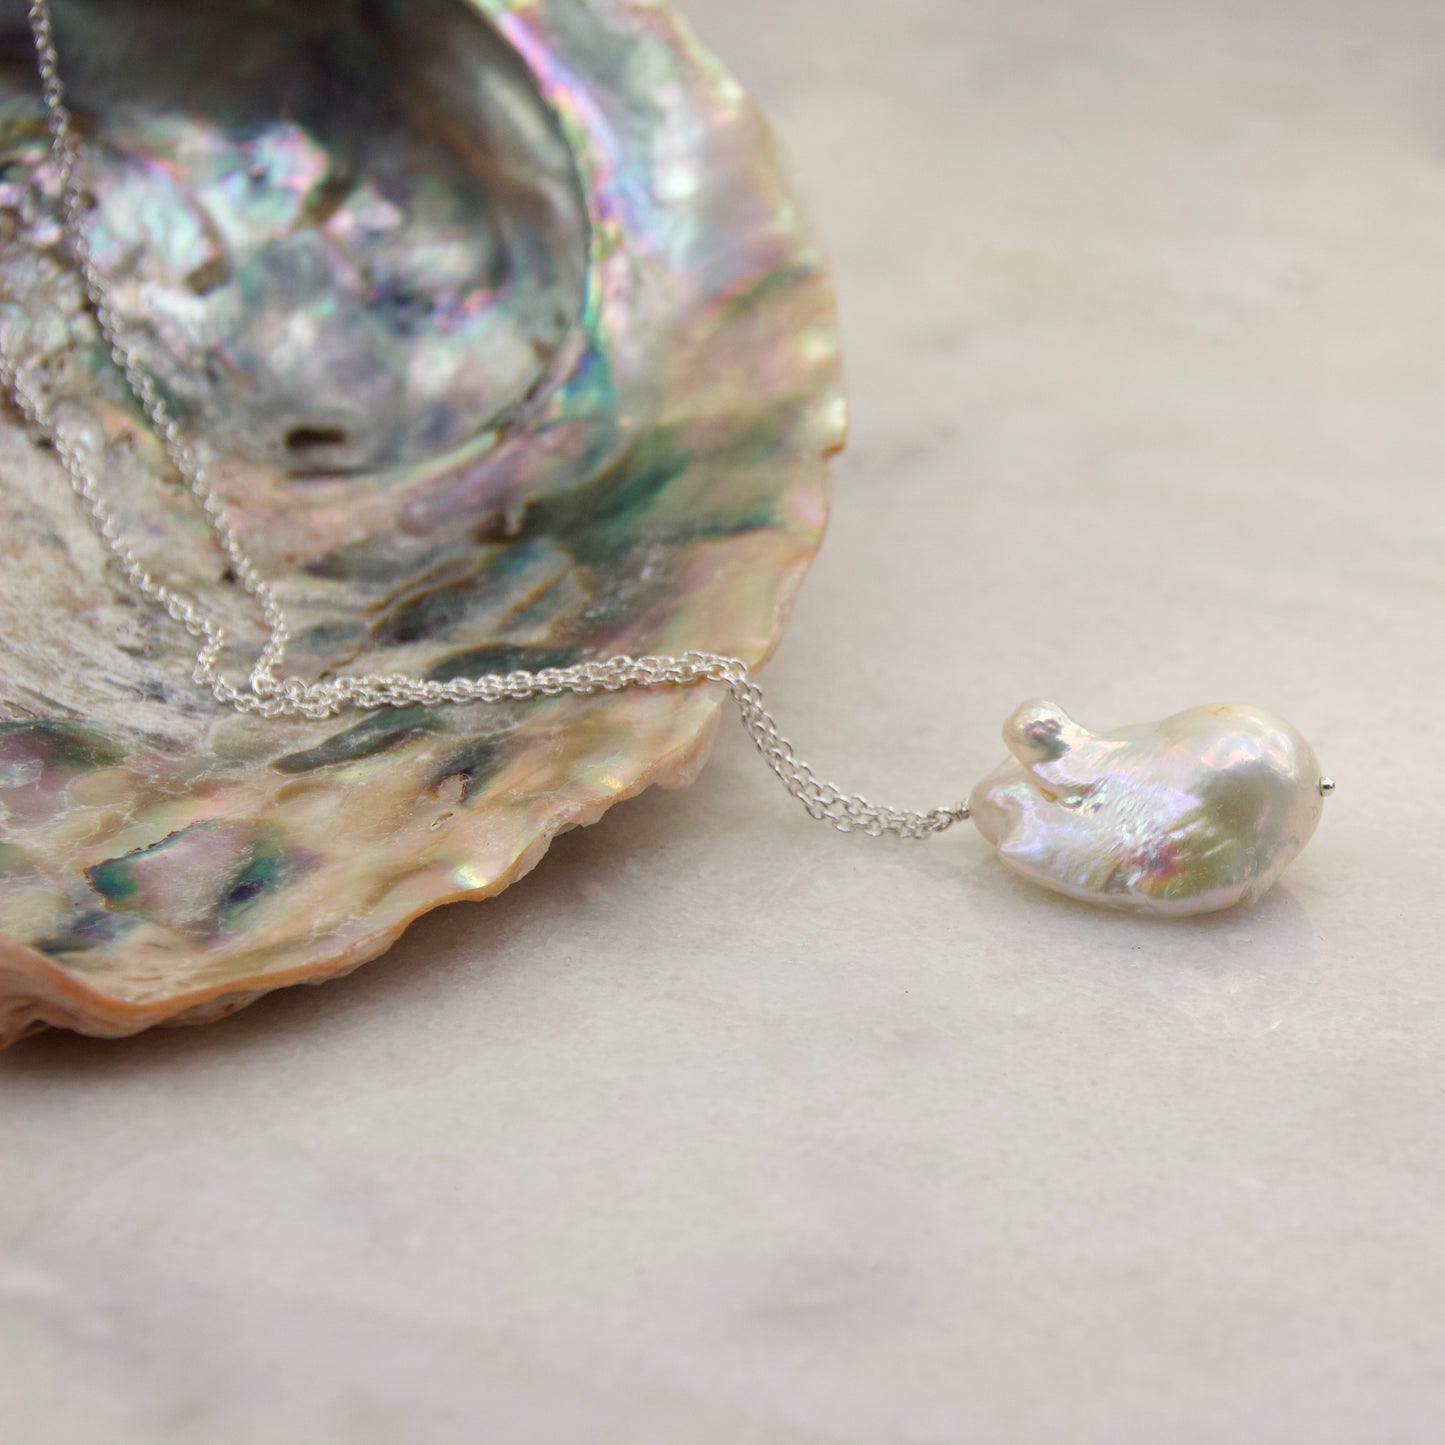 Empress of the Pearl Baroque Pendant